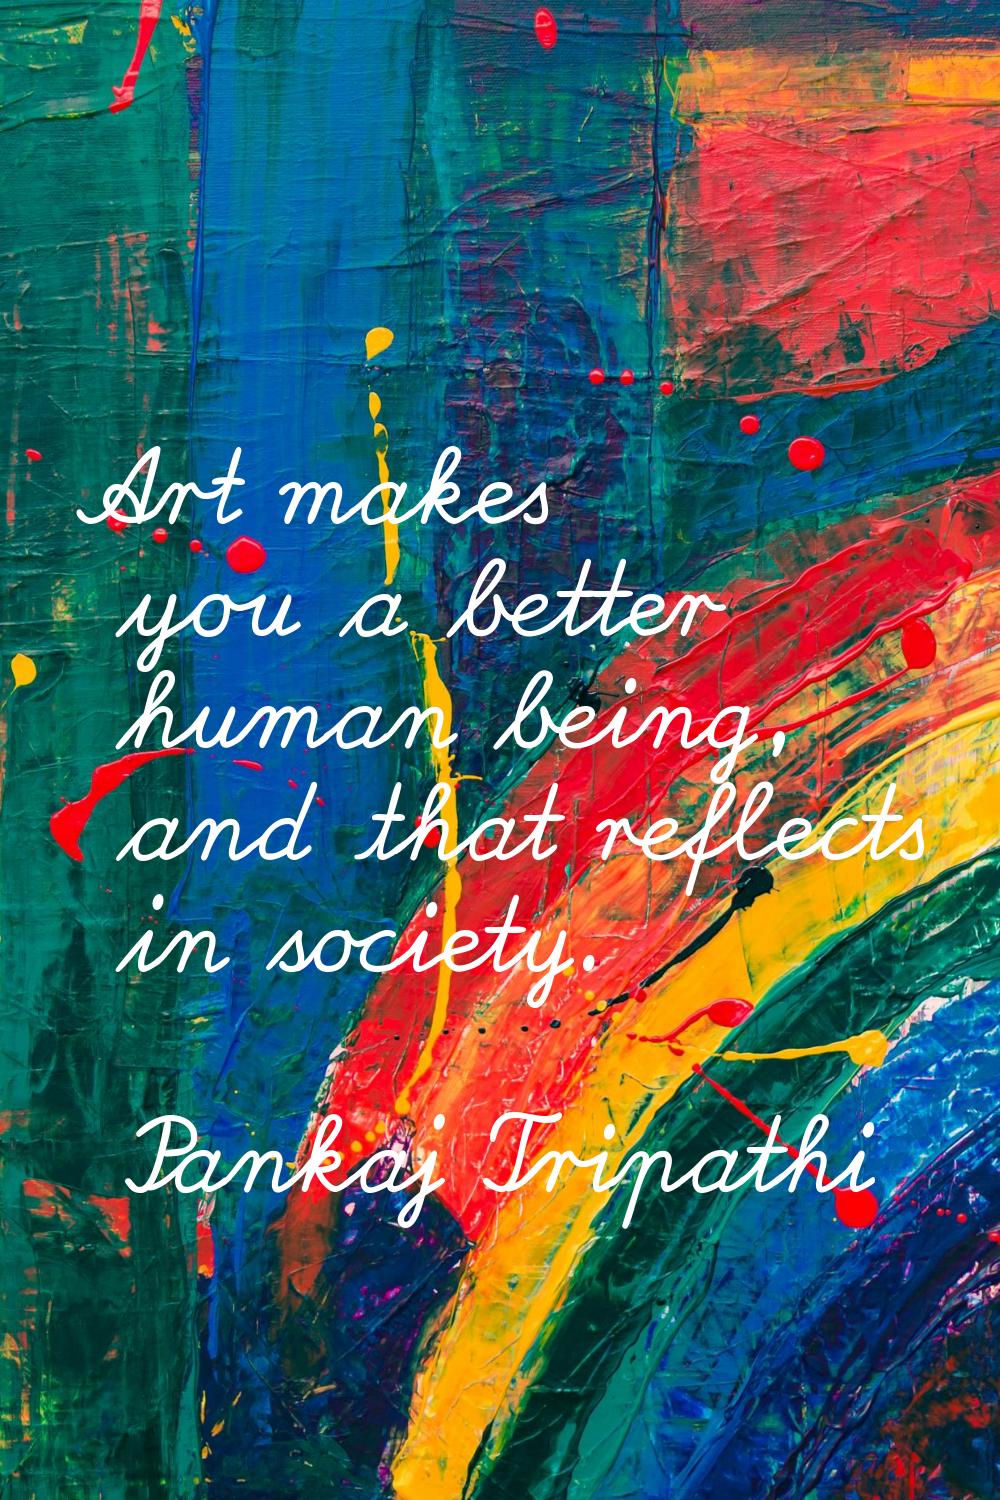 Art makes you a better human being, and that reflects in society.